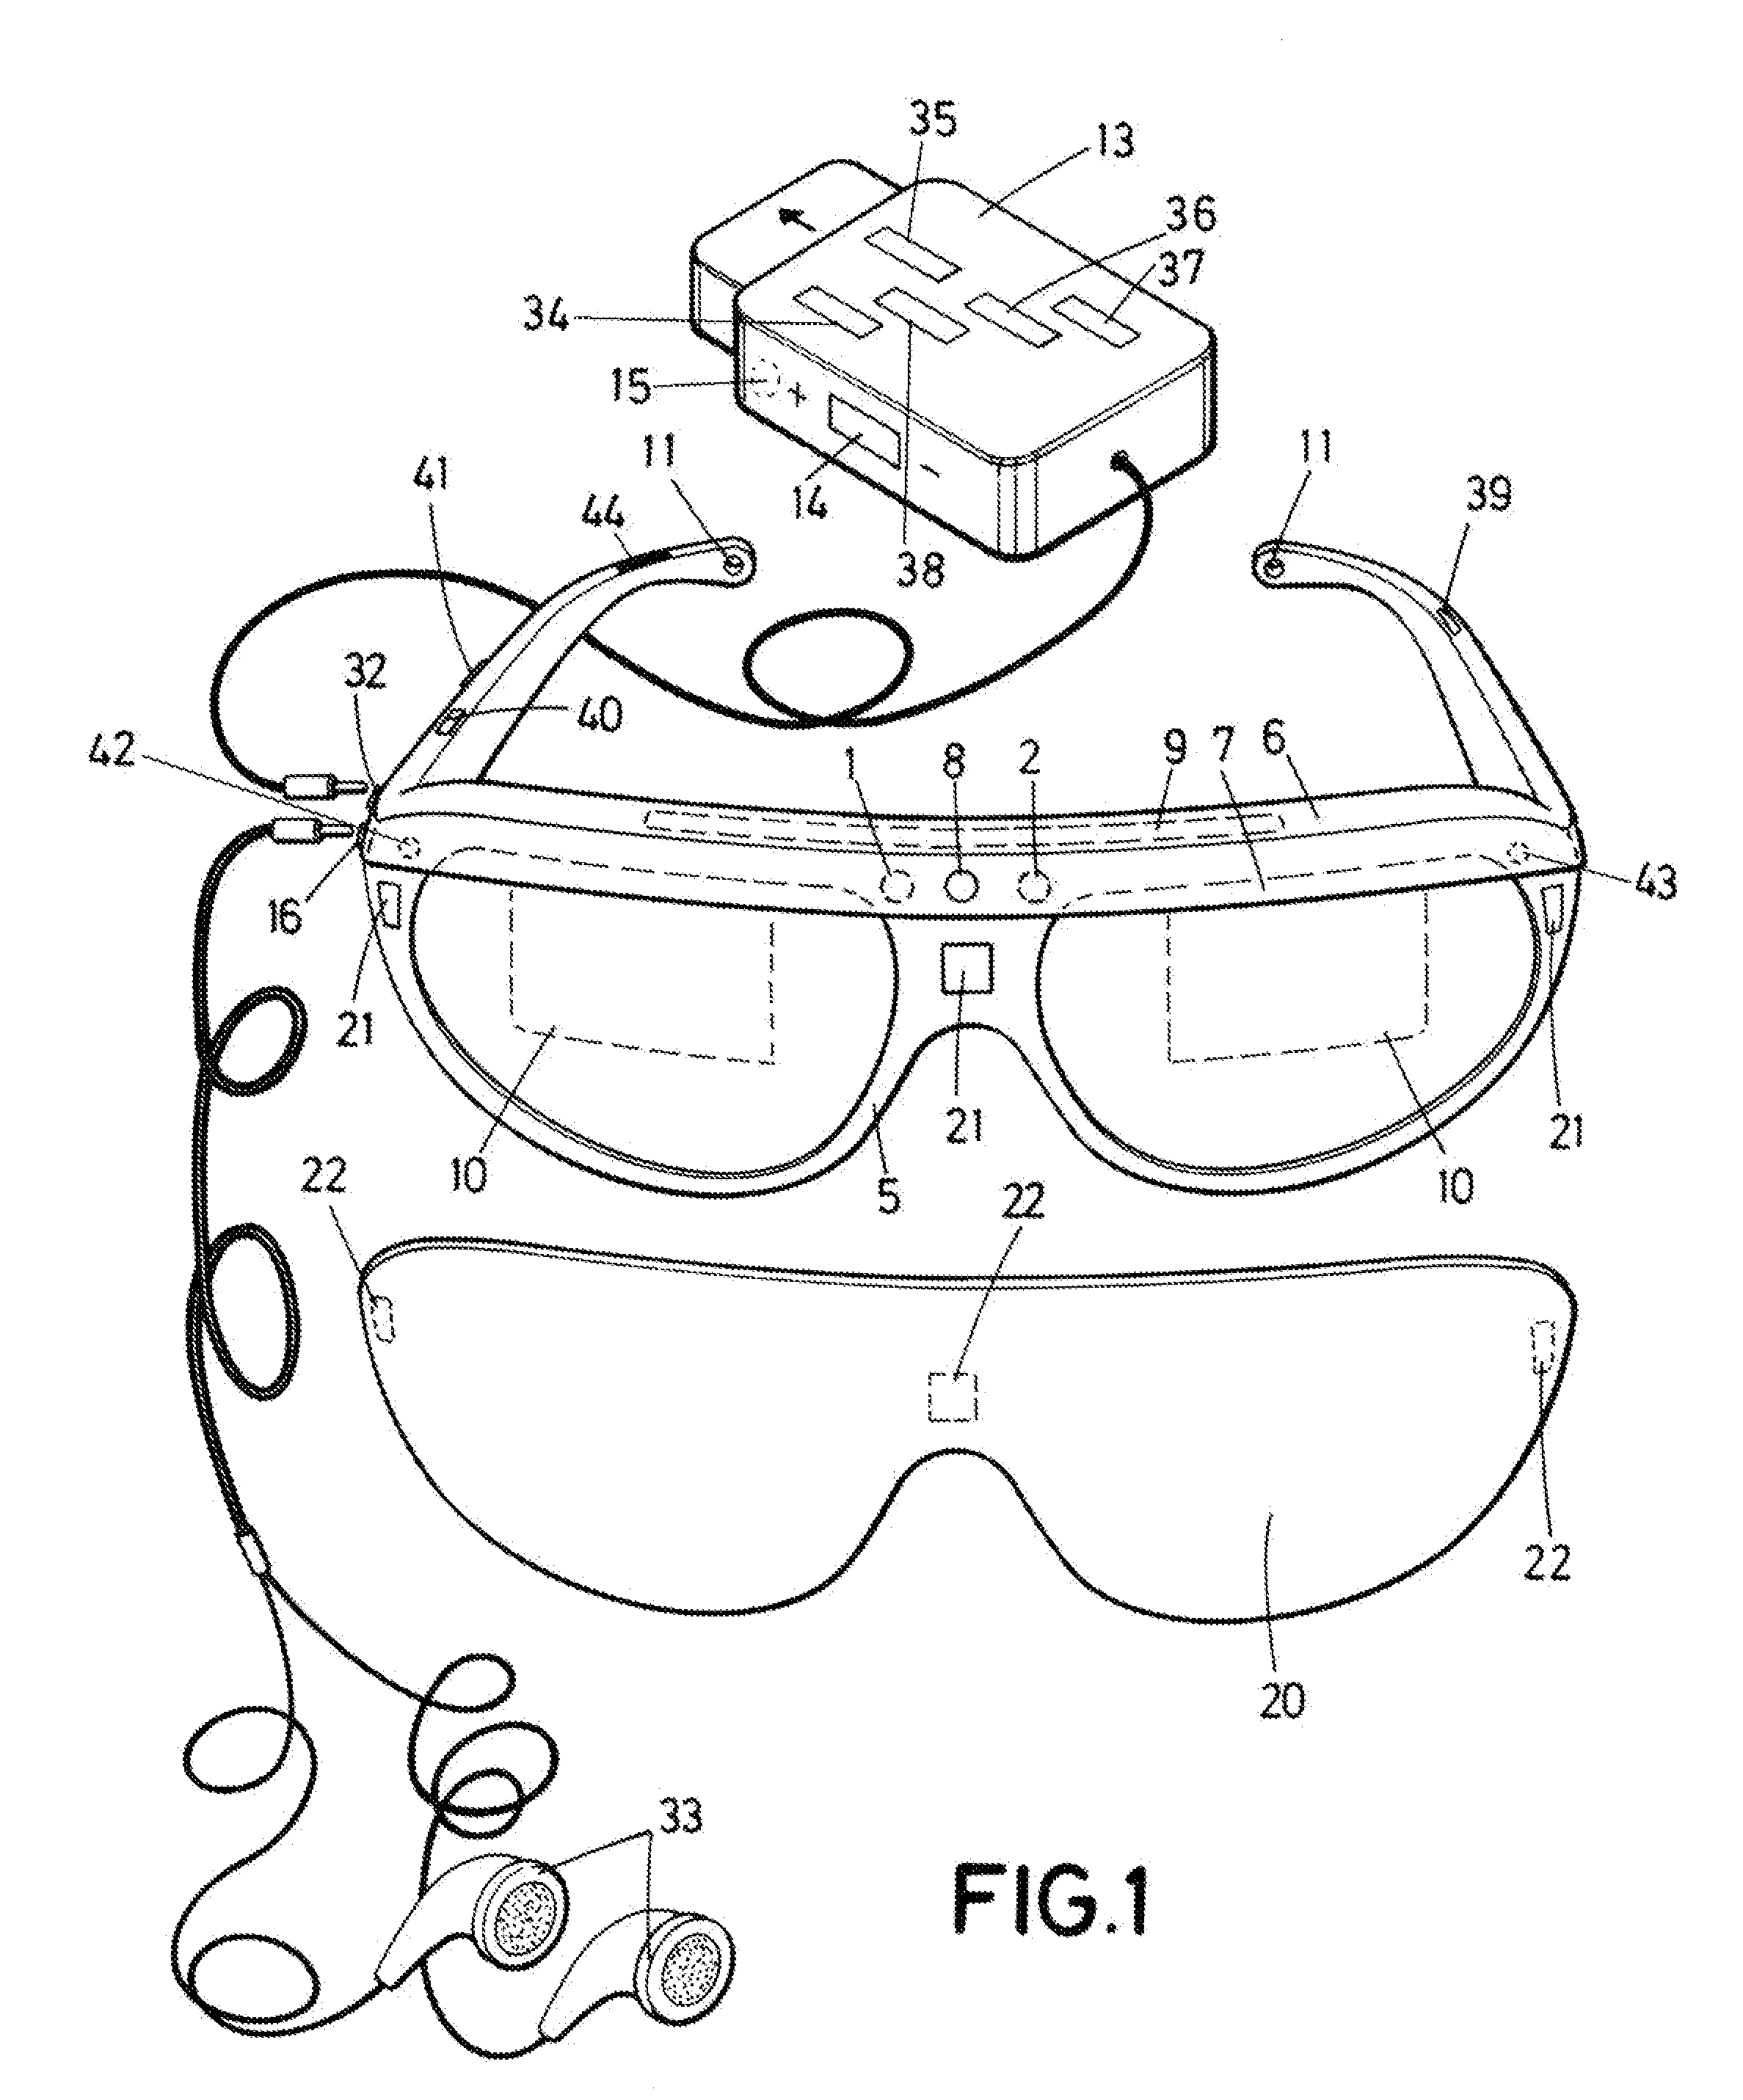 Enhanced-reality electronic device for low-vision pathologies, and implant procedure